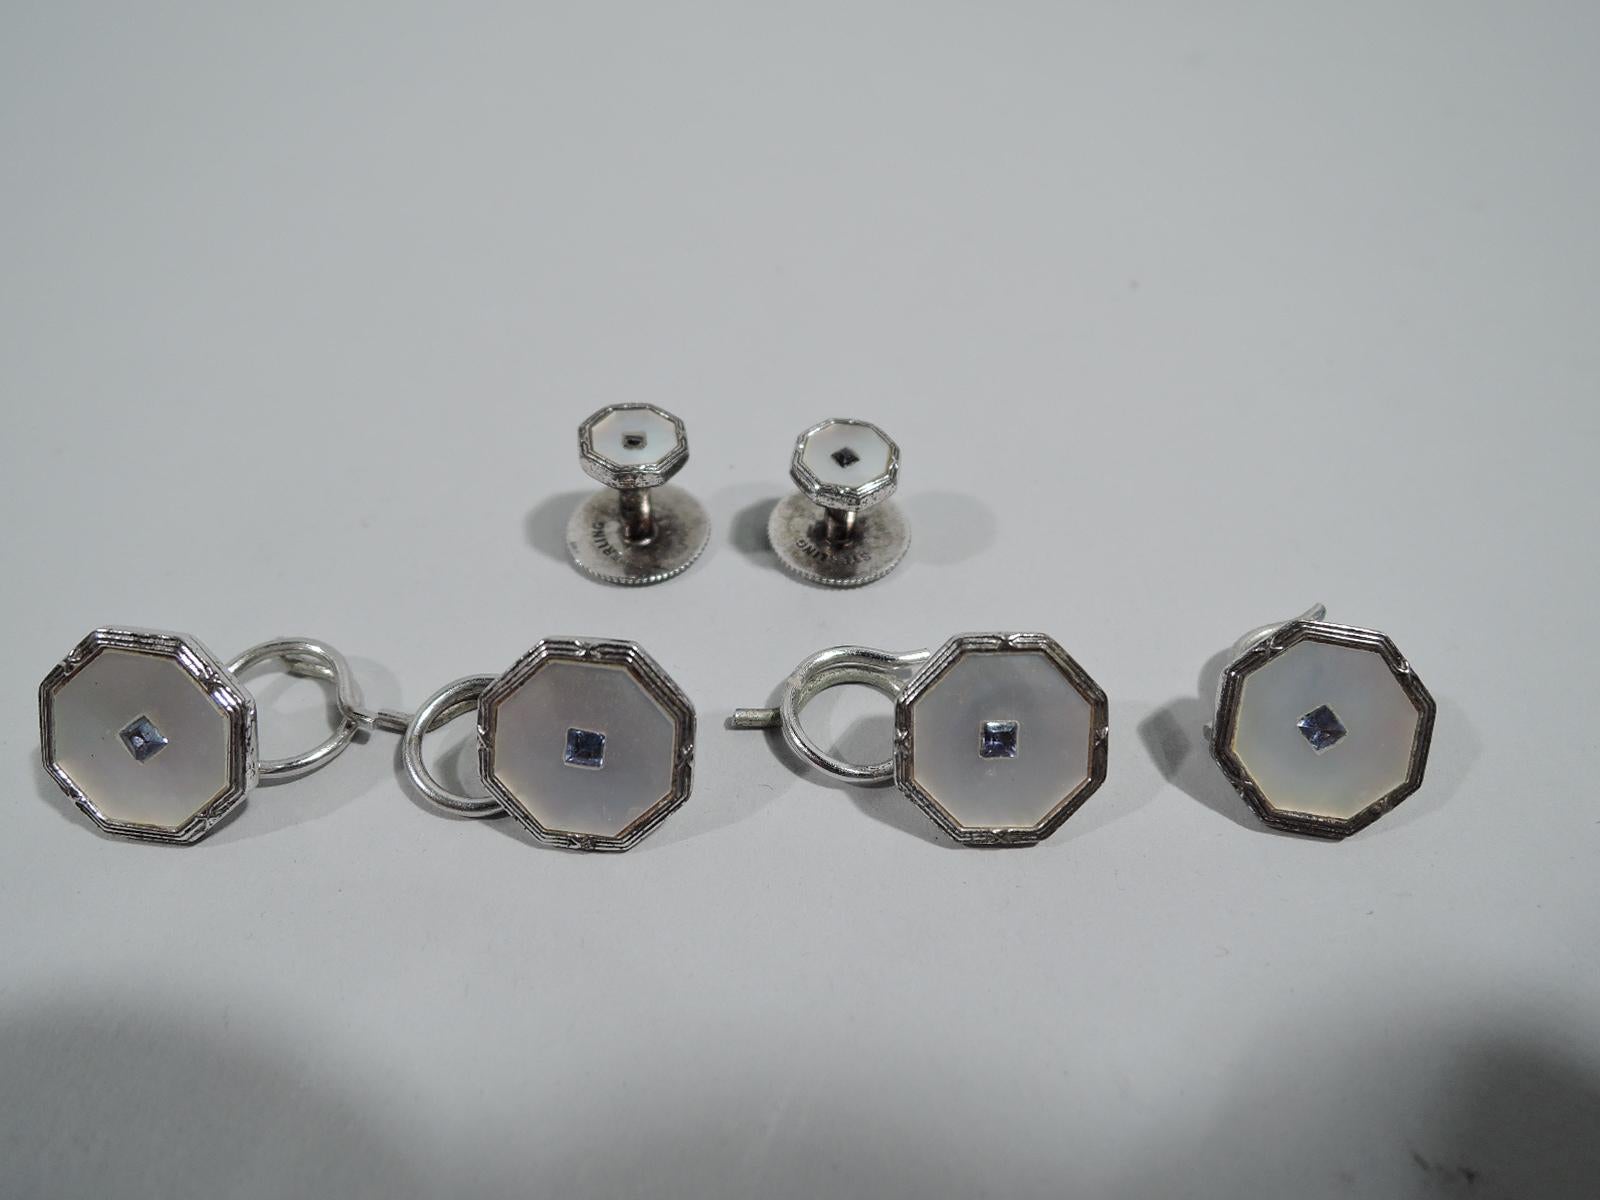 Edwardian Antique American Mother-of-Pearl & Sapphire Cufflink Stud Button Set